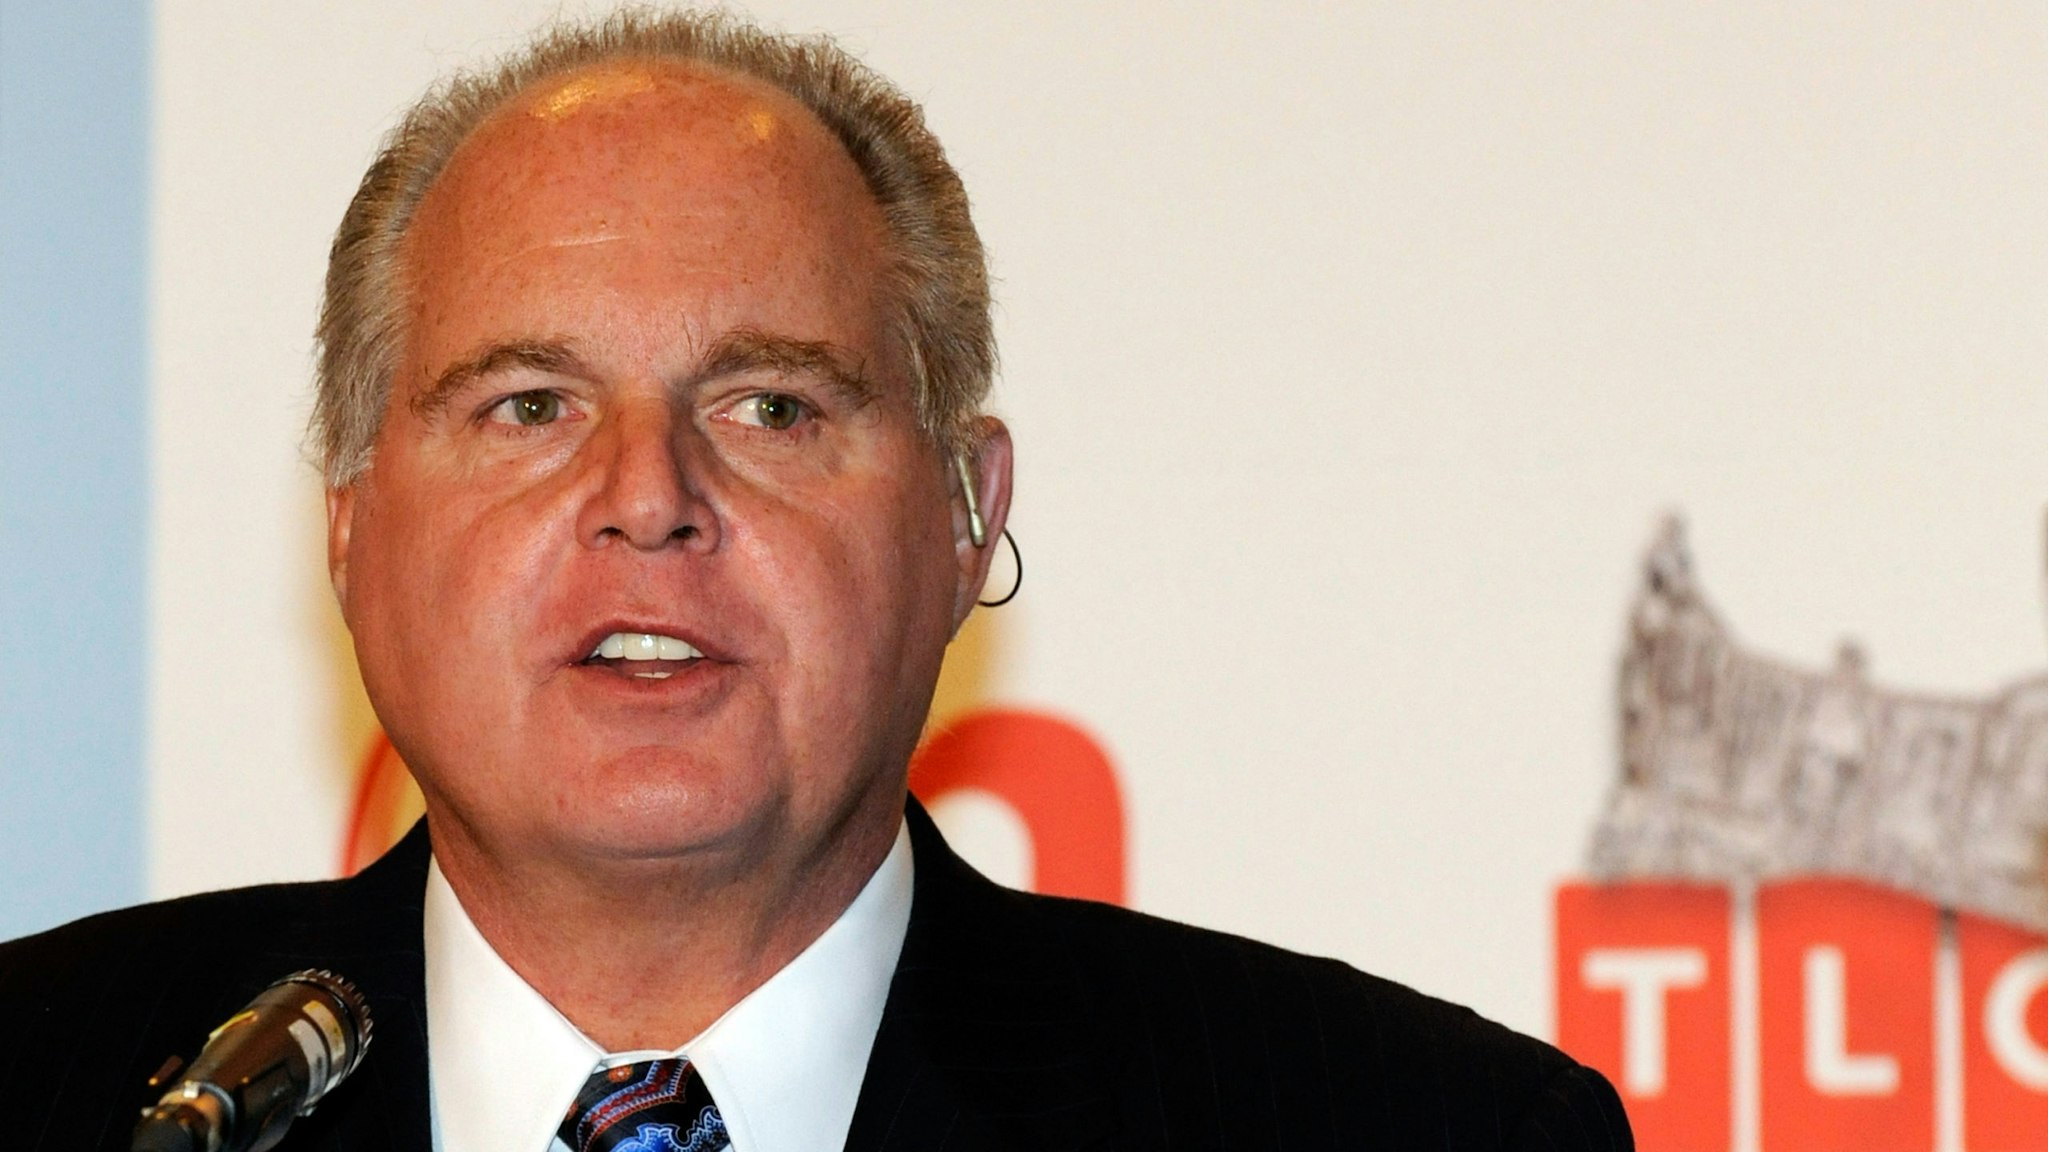 LAS VEGAS - JANUARY 27: Radio talk show host and conservative commentator Rush Limbaugh, one of the judges for the 2010 Miss America Pageant, speaks during a news conference for judges at the Planet Hollywood Resort &amp; Casino January 27, 2010 in Las Vegas, Nevada. The pageant will be held at the resort on January 30, 2010.